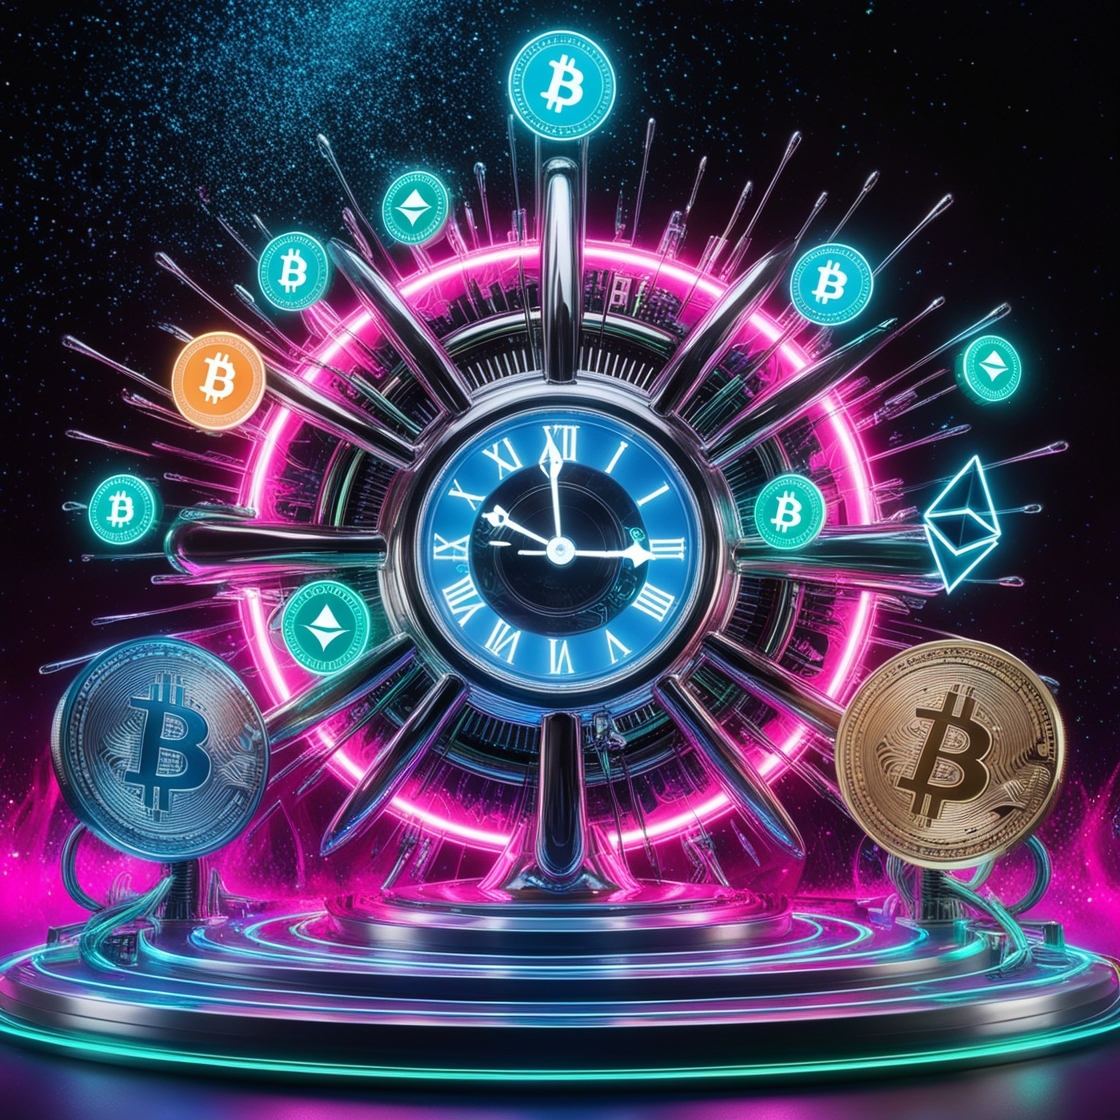 A futuristic, neon-lit cryptocurrency hub, rendered in mesmerizing digital art, where sleek, silver clockwork mechanisms entwine with vibrant, pulsing circuits, as glowing cryptocurrency symbols - bitcoins, ethereums, and dogecoins - swirl around a central, gleaming crypto-chronometer, radiating an otherworldly aura, with an aesthetic blending Tron's futuristic sheen and Neo- Tokyo's cyberpunk flair, bathed in a palette of electric blues, hot pinks, and emerald greens, set against a background of dark, glittering stardust, evoking a sense of revolutionary innovation and futuristic possibilities.